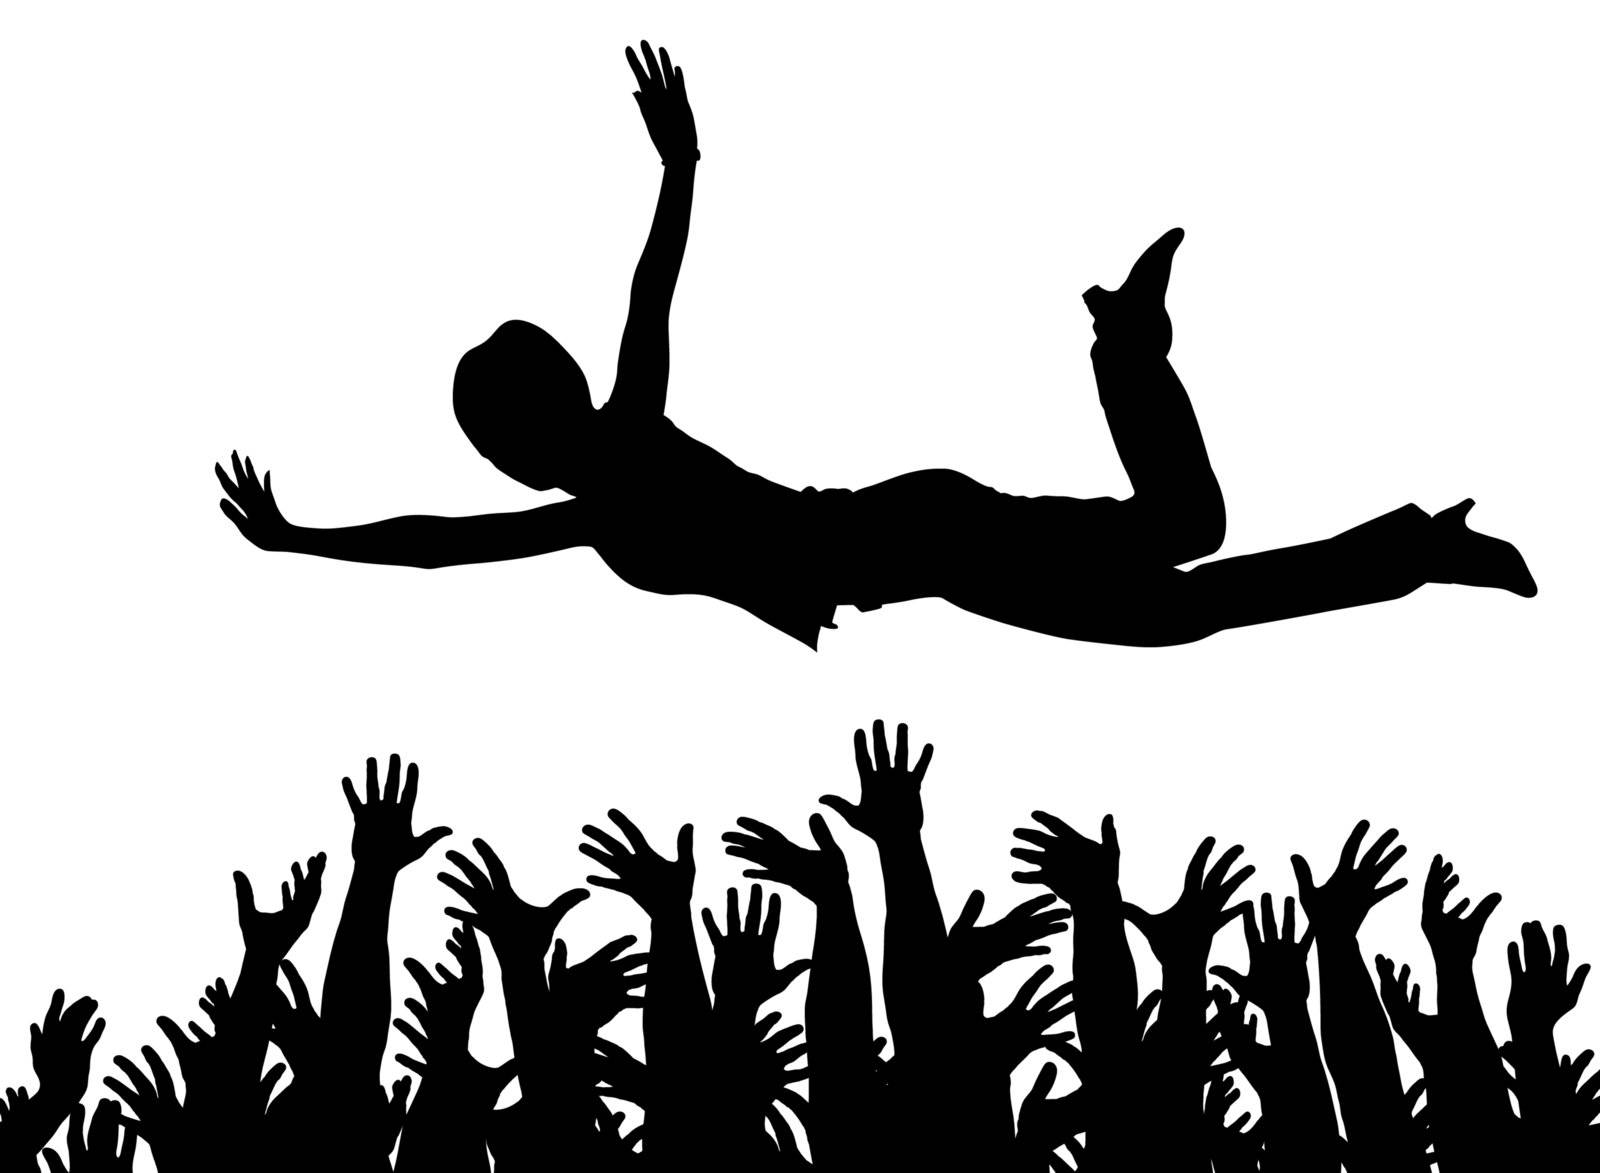 Editable vector illustration of a woman being caught by many hands with all arms as separate objects